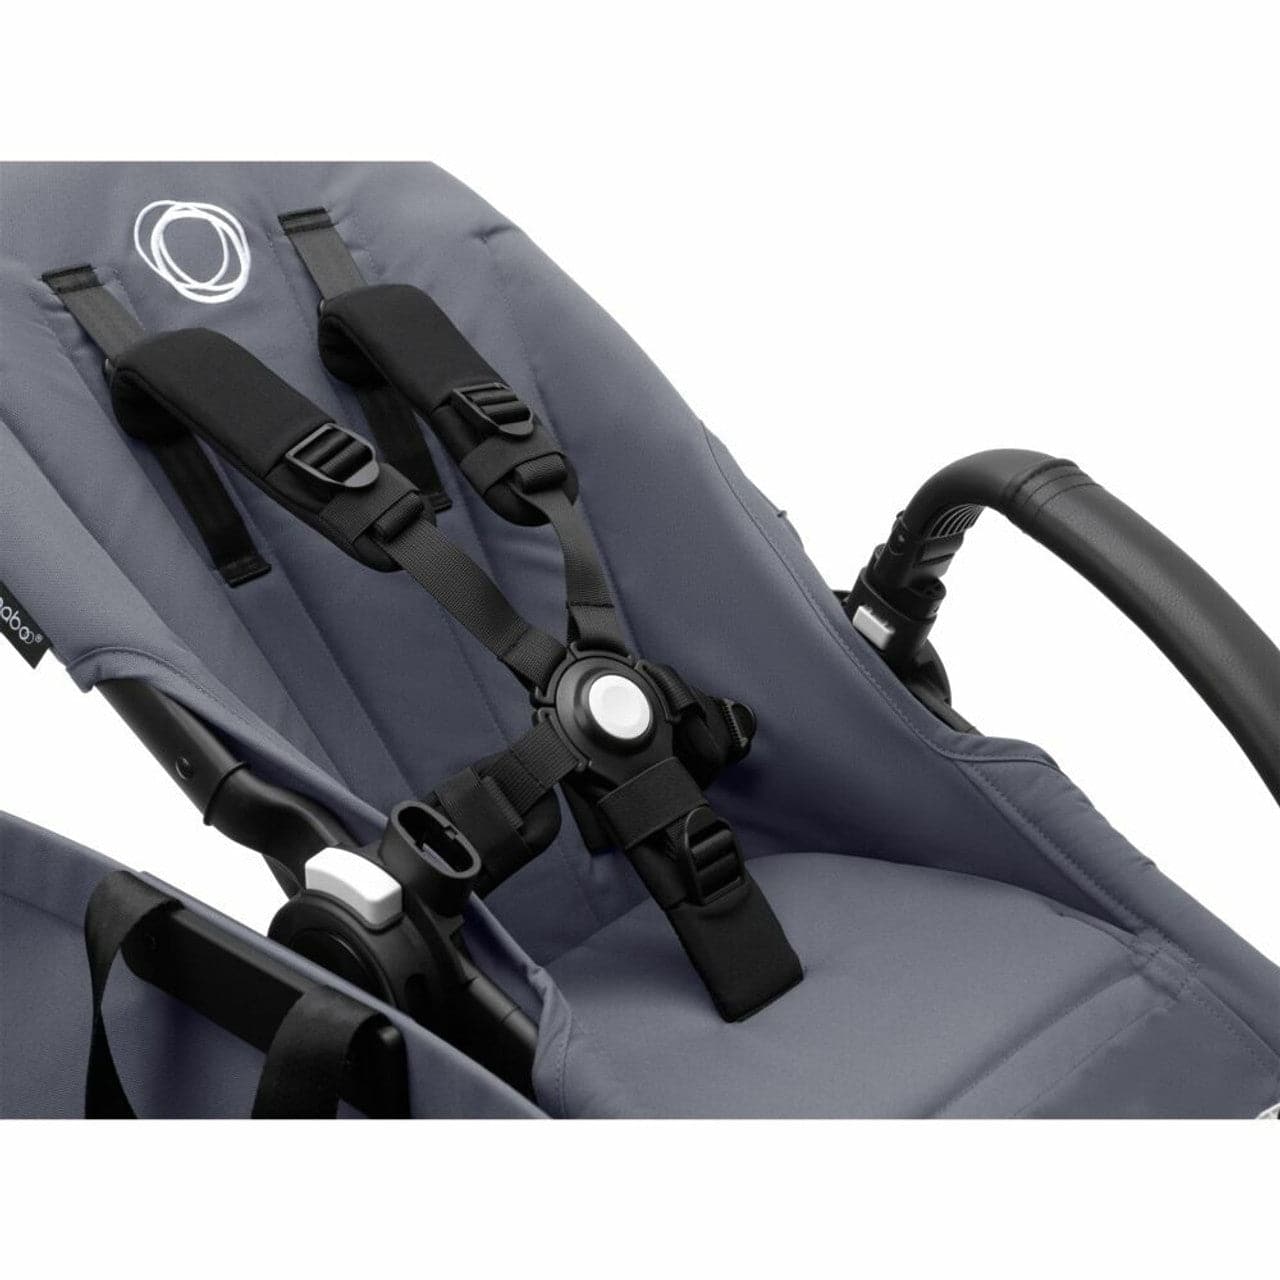 Bugaboo Donkey 5 Mono Travel System on Black/Grey Chassis + Turtle Air - Choose Your Colour - For Your Little One